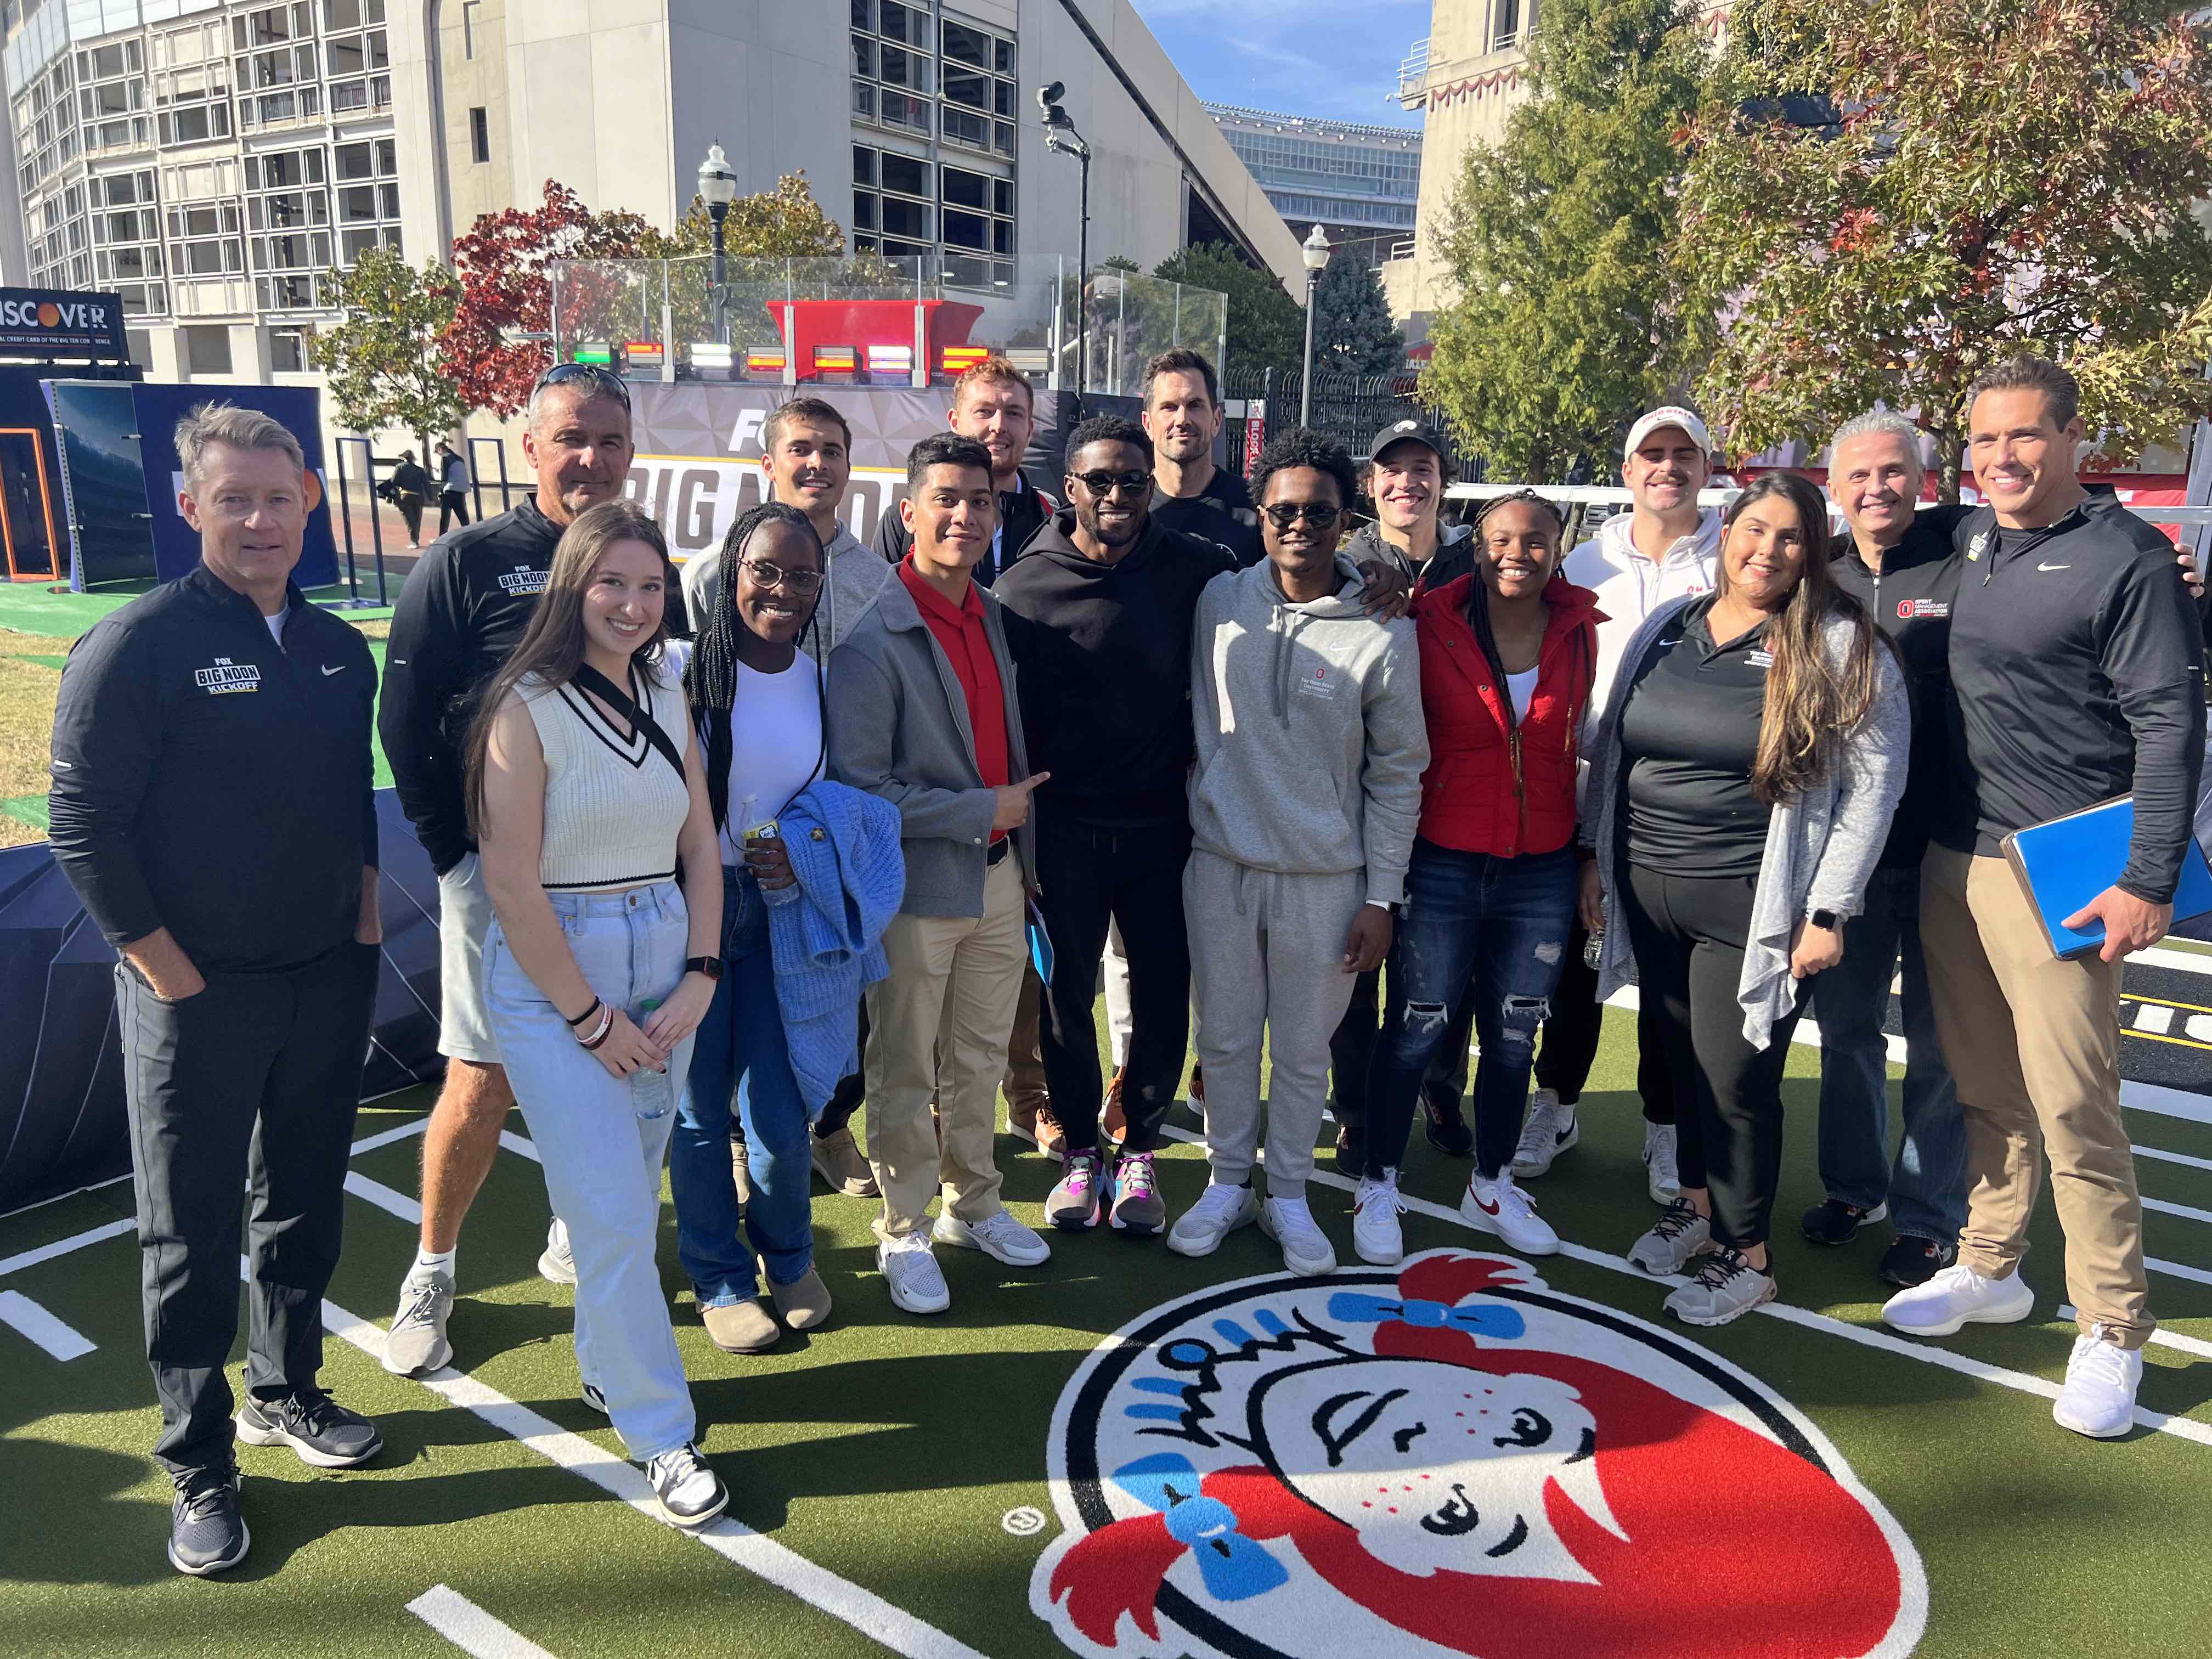 Ohio State Sport Management group posing together for a photo on a football field